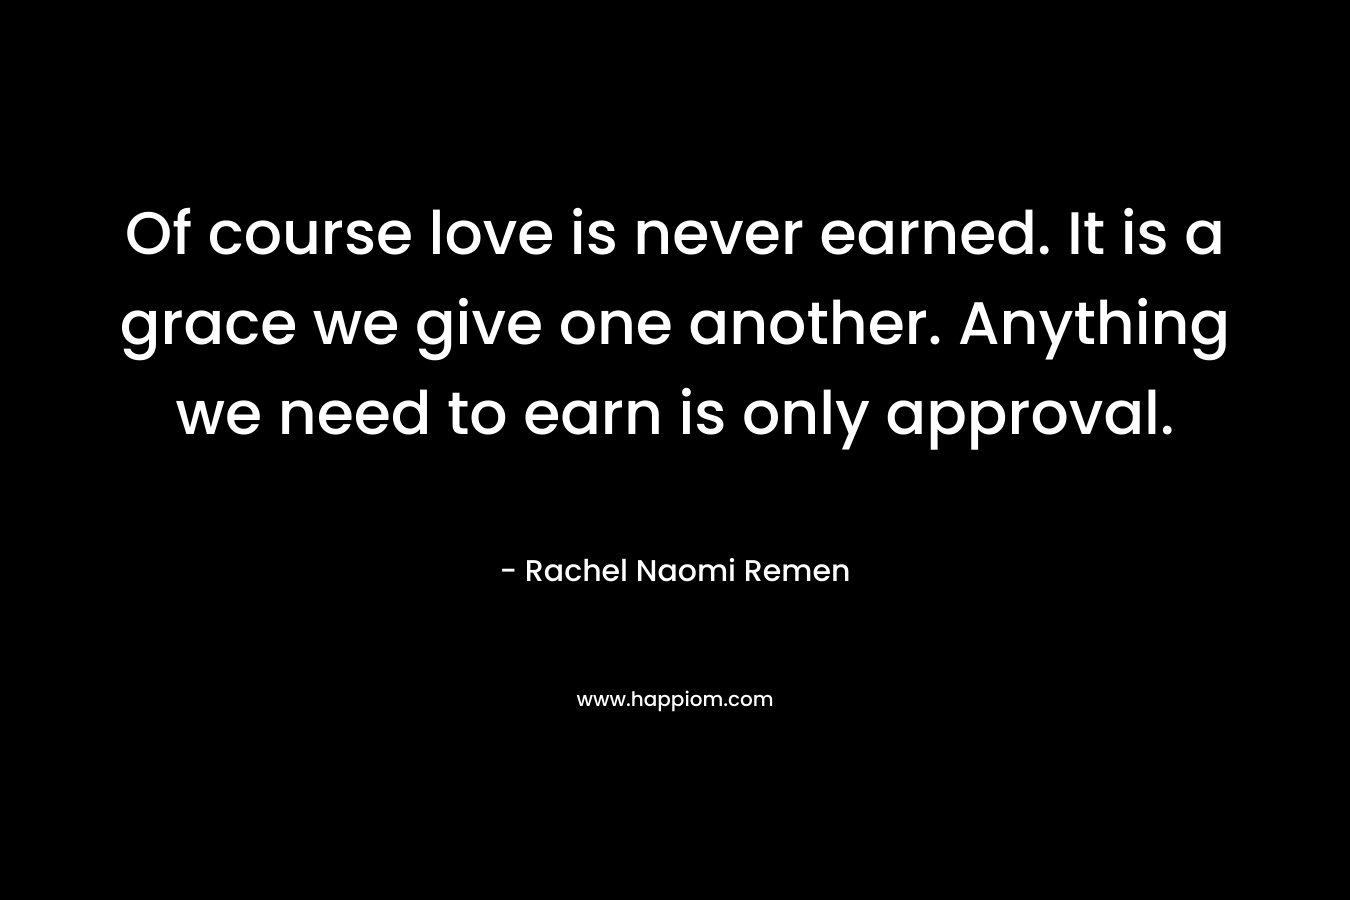 Of course love is never earned. It is a grace we give one another. Anything we need to earn is only approval.